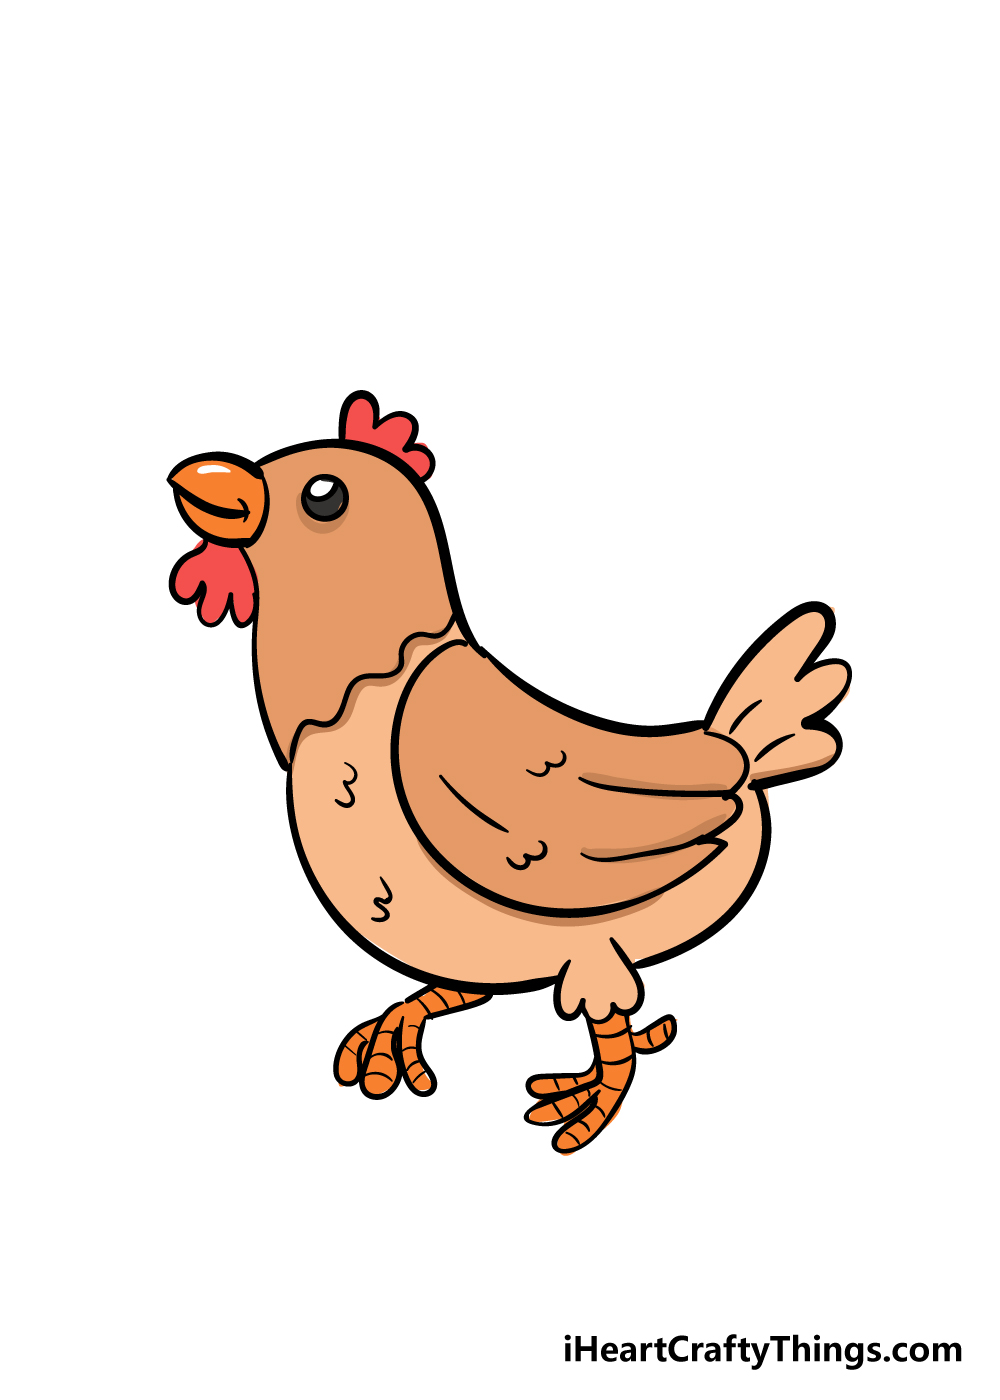 Fluffy Brown Hen Coloring Page for Kids - Free Chickens Printable Coloring  Pages Online for Kids - ColoringPages101.com | Coloring Pages for Kids